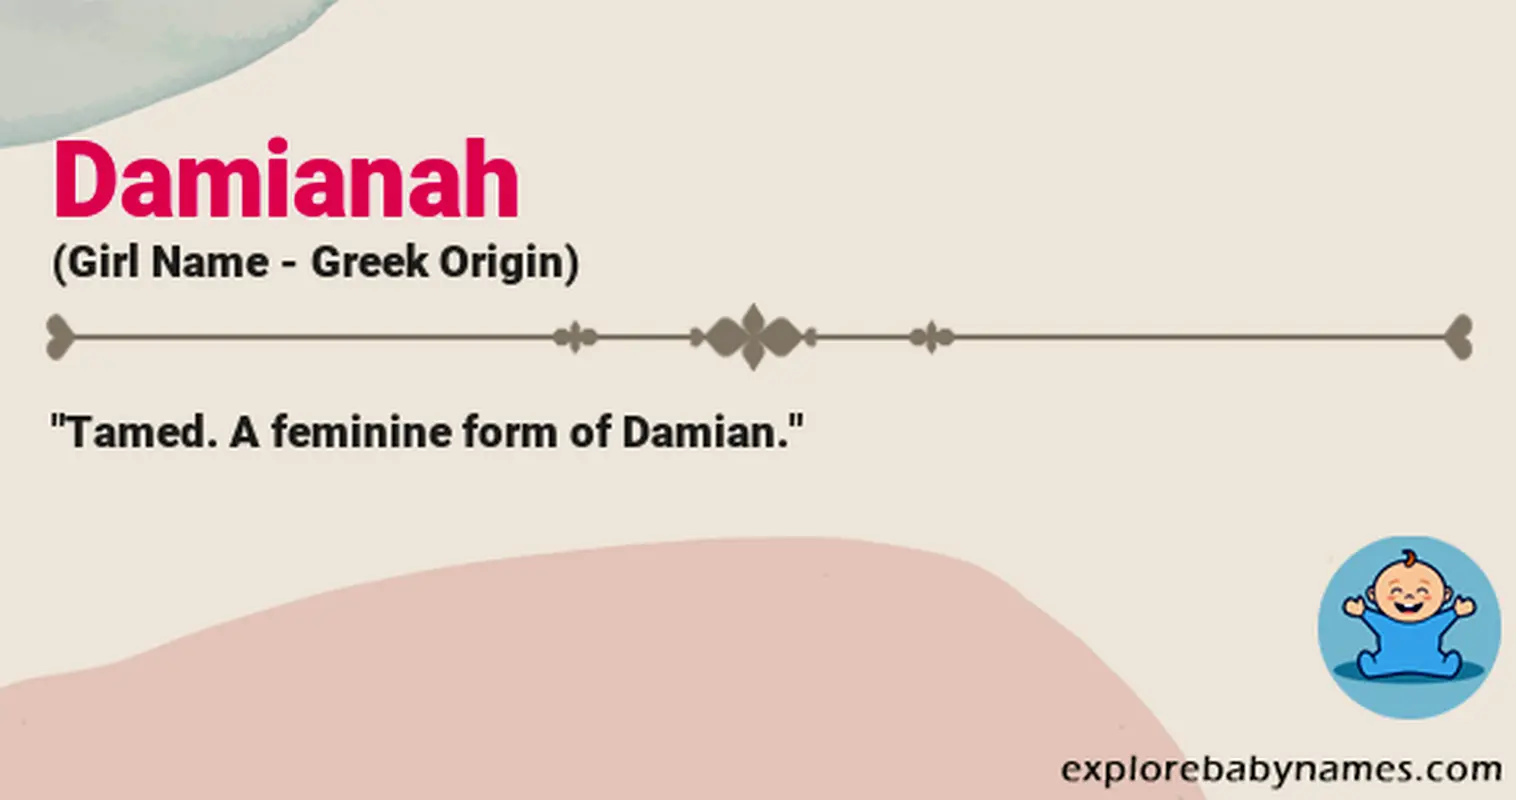 Meaning of Damianah